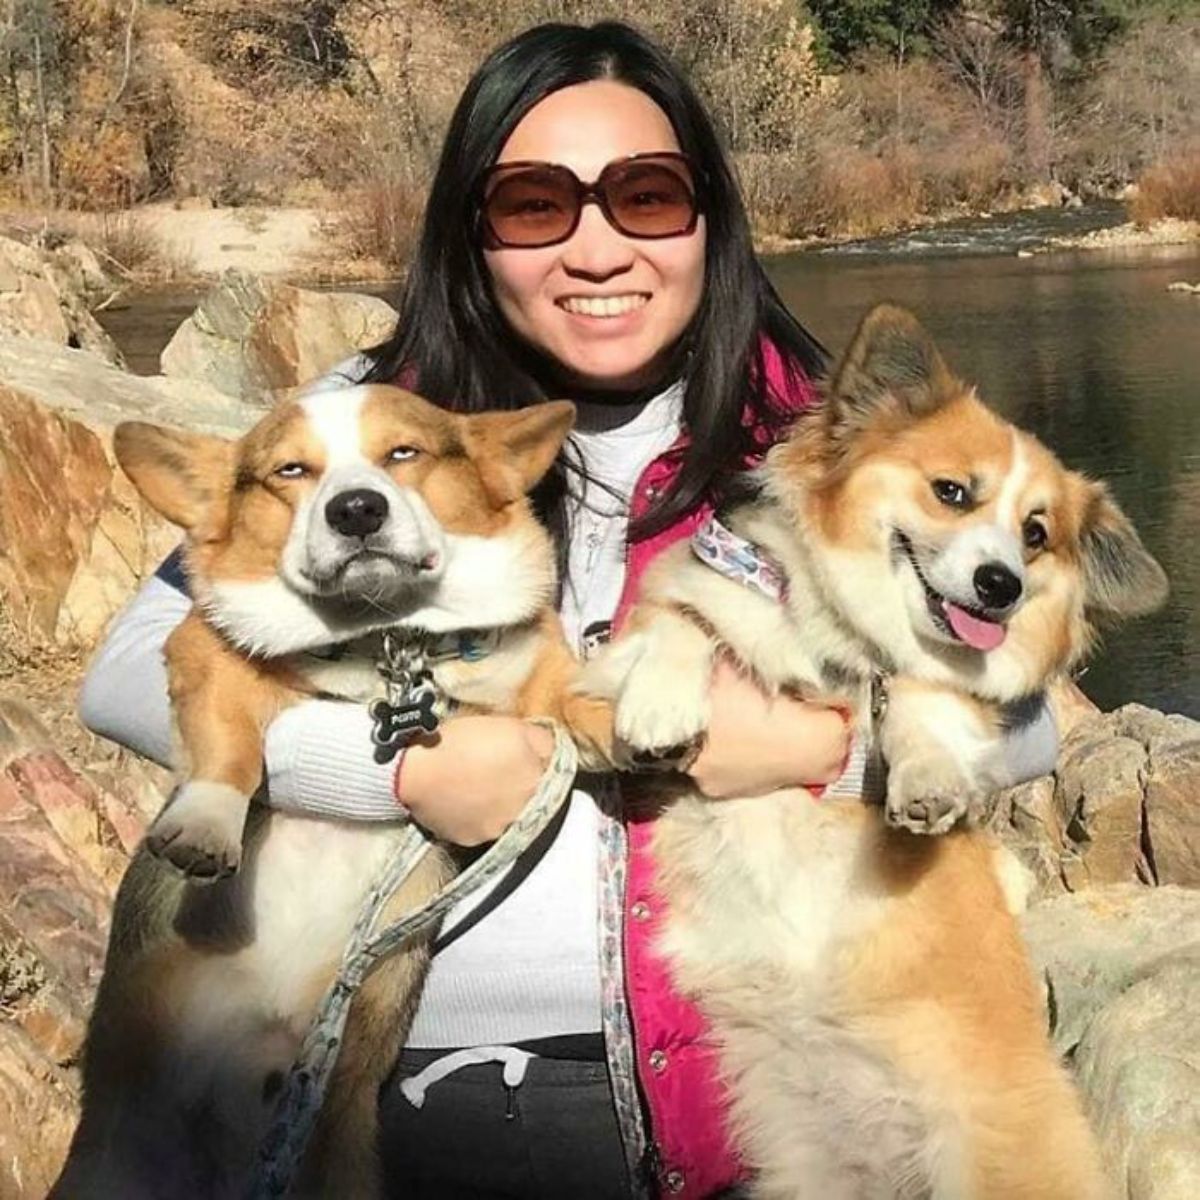 2 brown and white corgis being held by a woman near a river